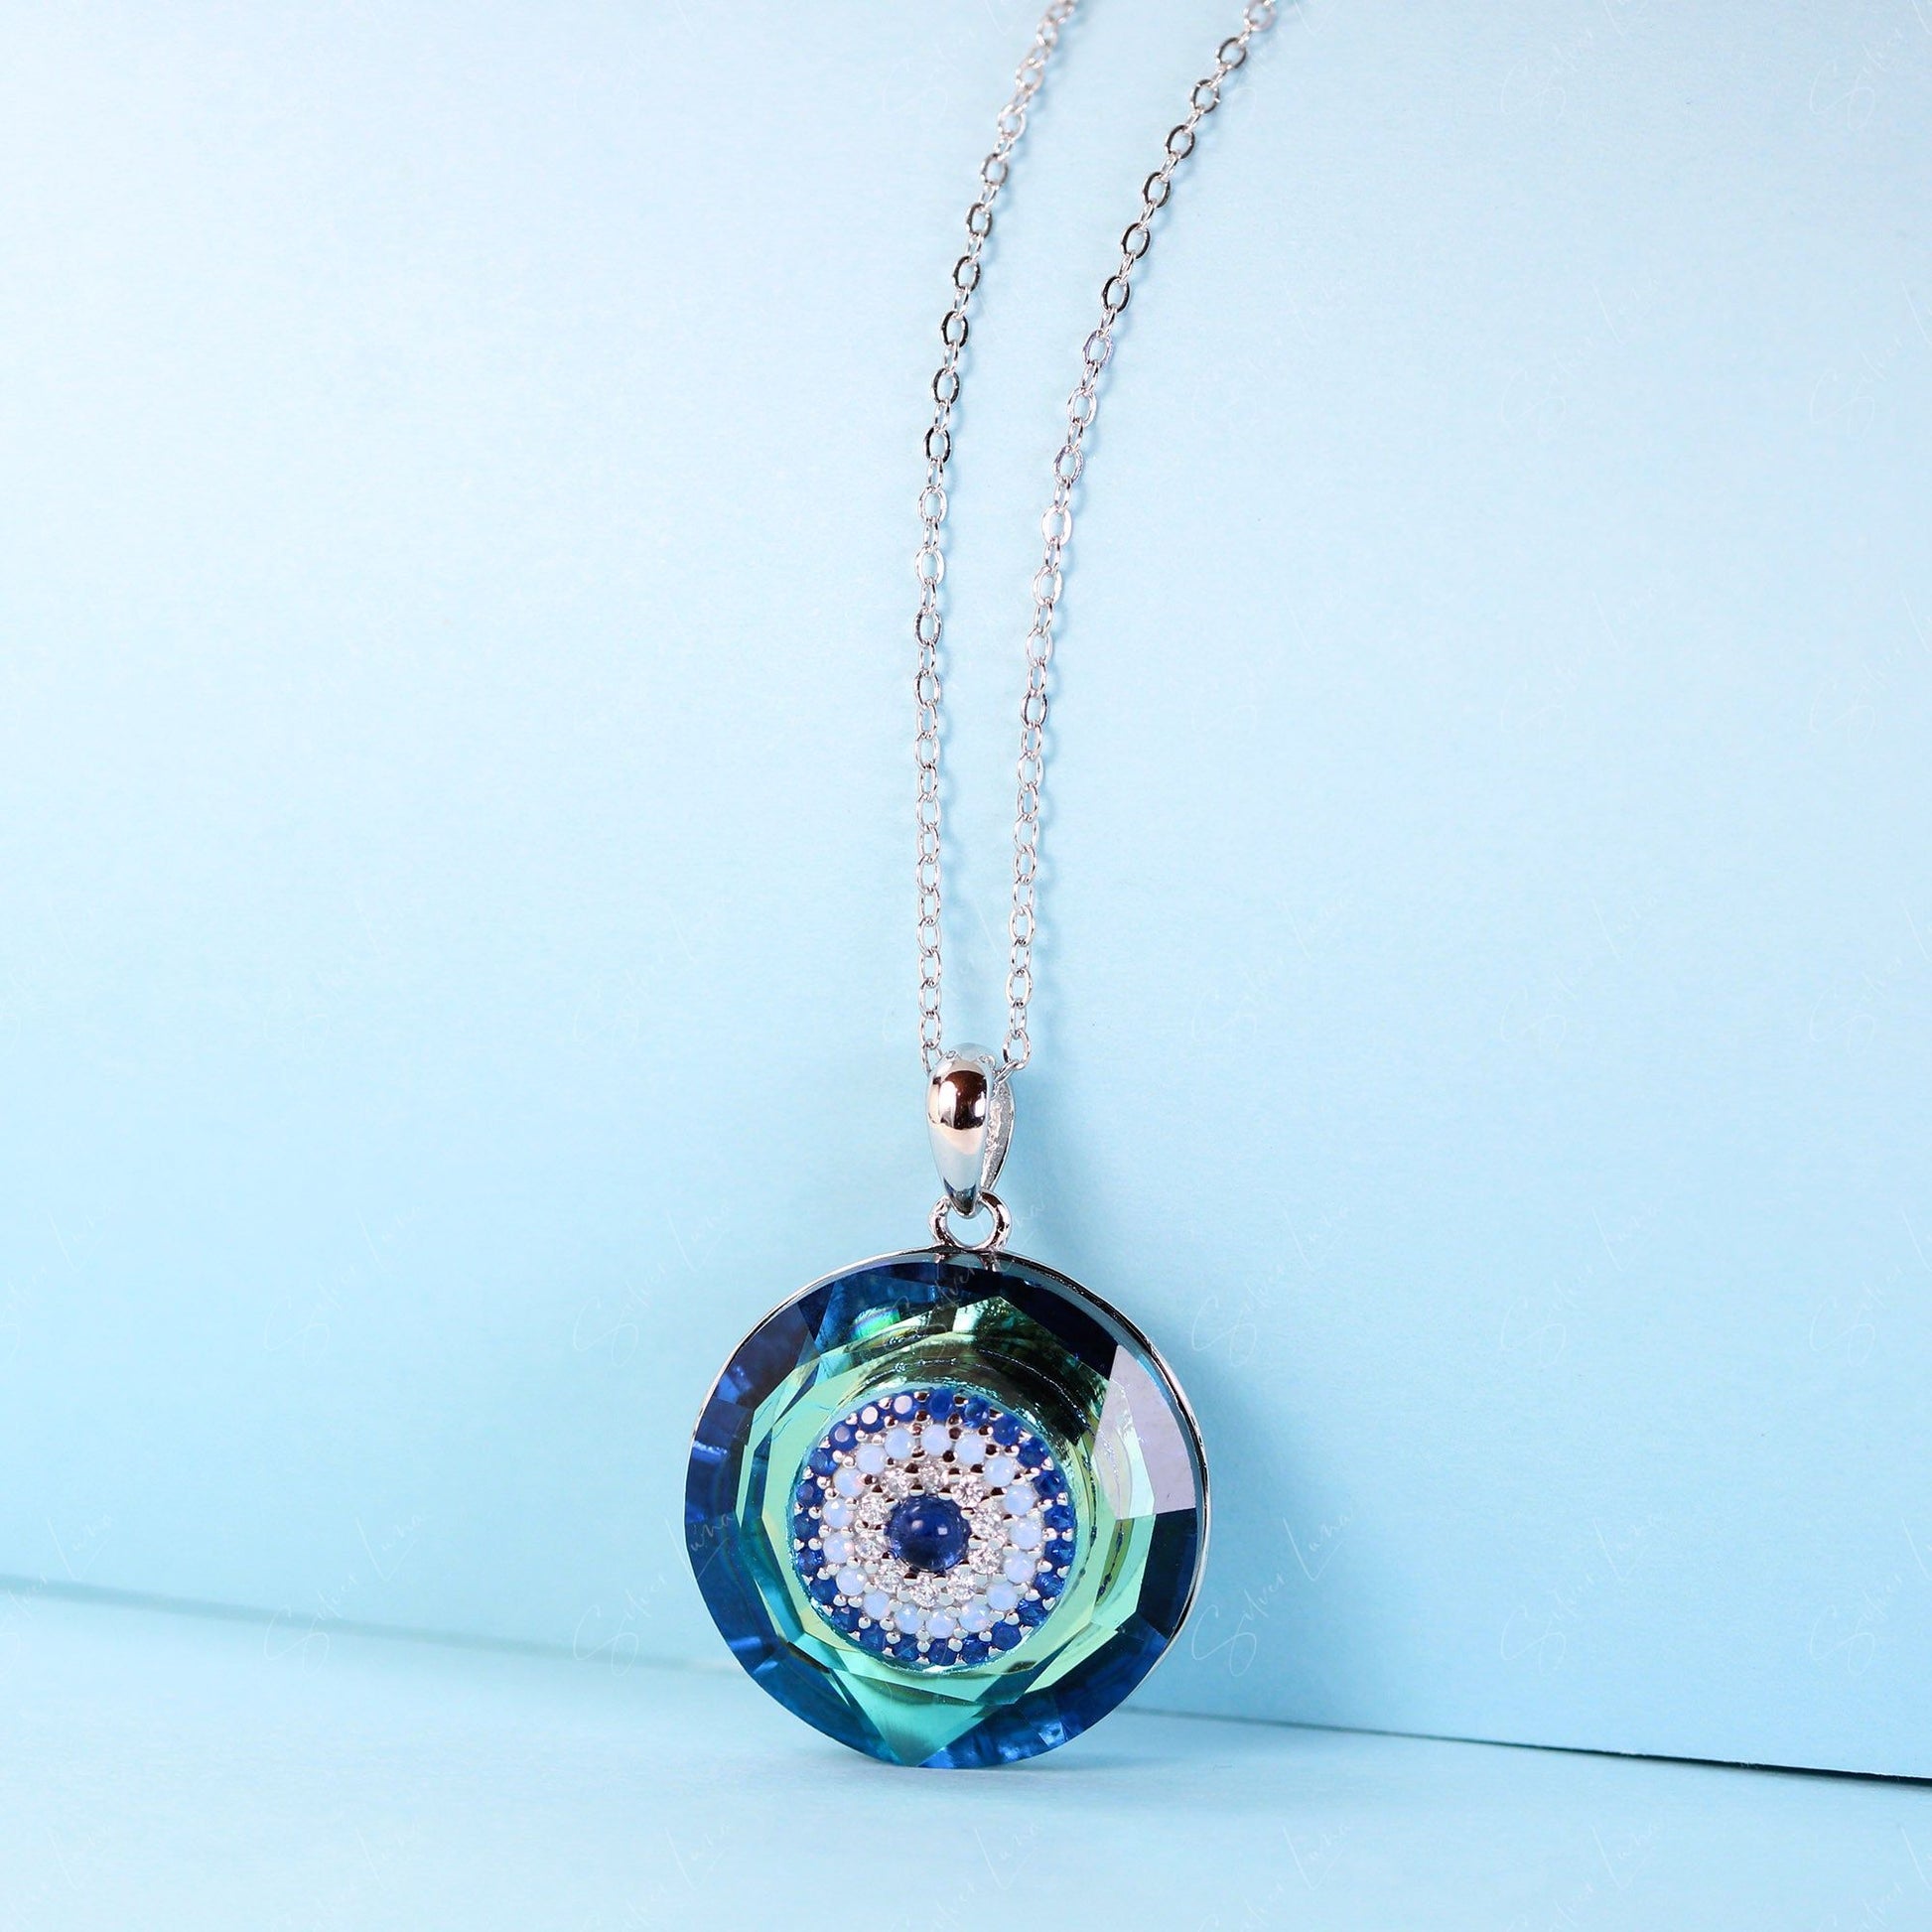 crystal evil eye protection pendant necklace